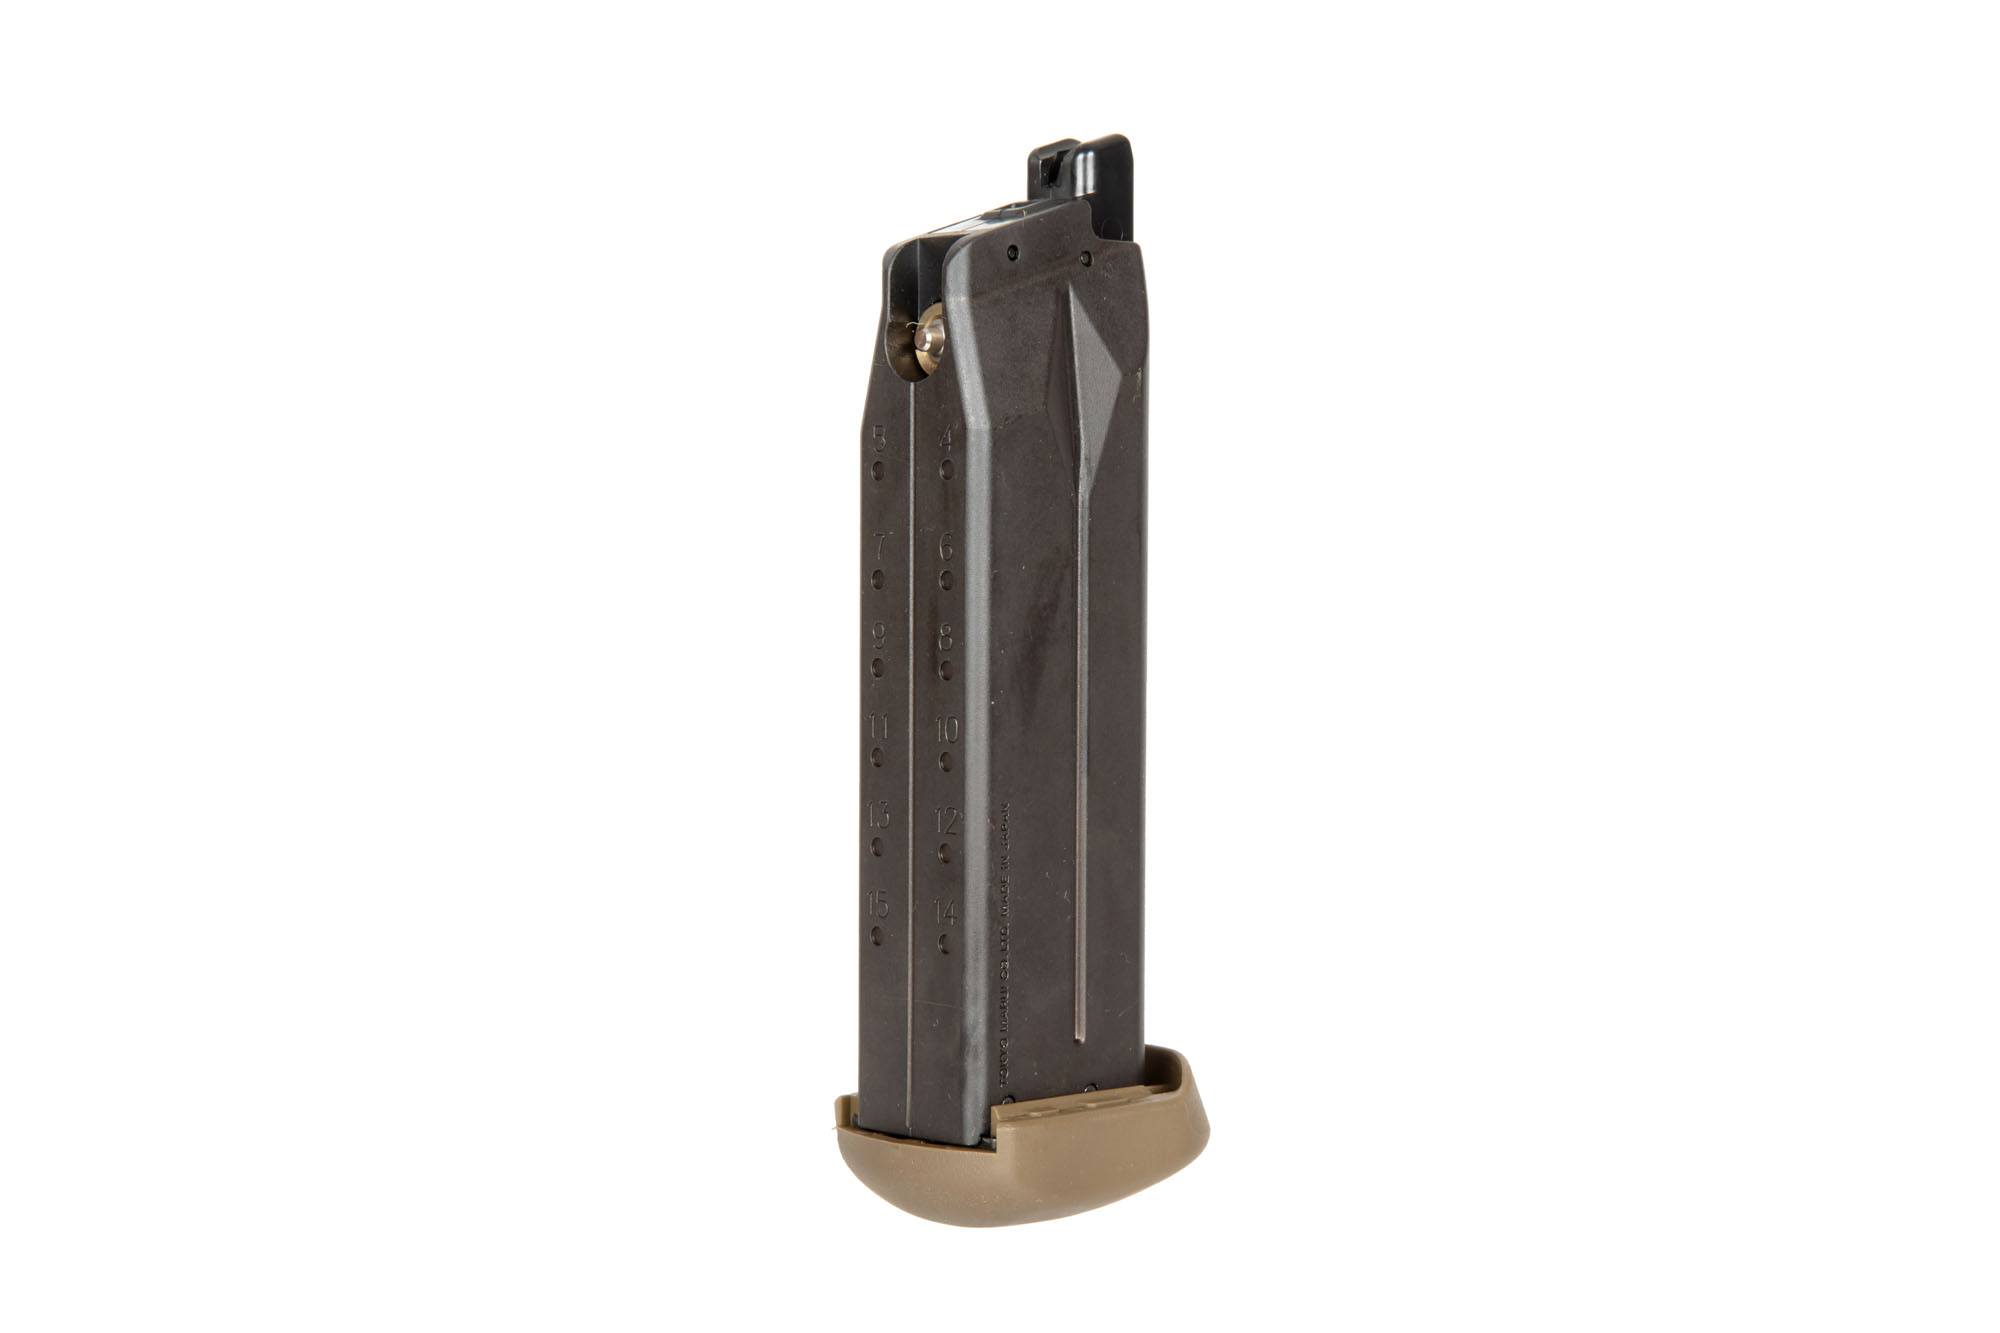 29 BB Green Gas Magazine for FNX-45 Tactical Replicas - FDE by Tokyo Marui on Airsoft Mania Europe